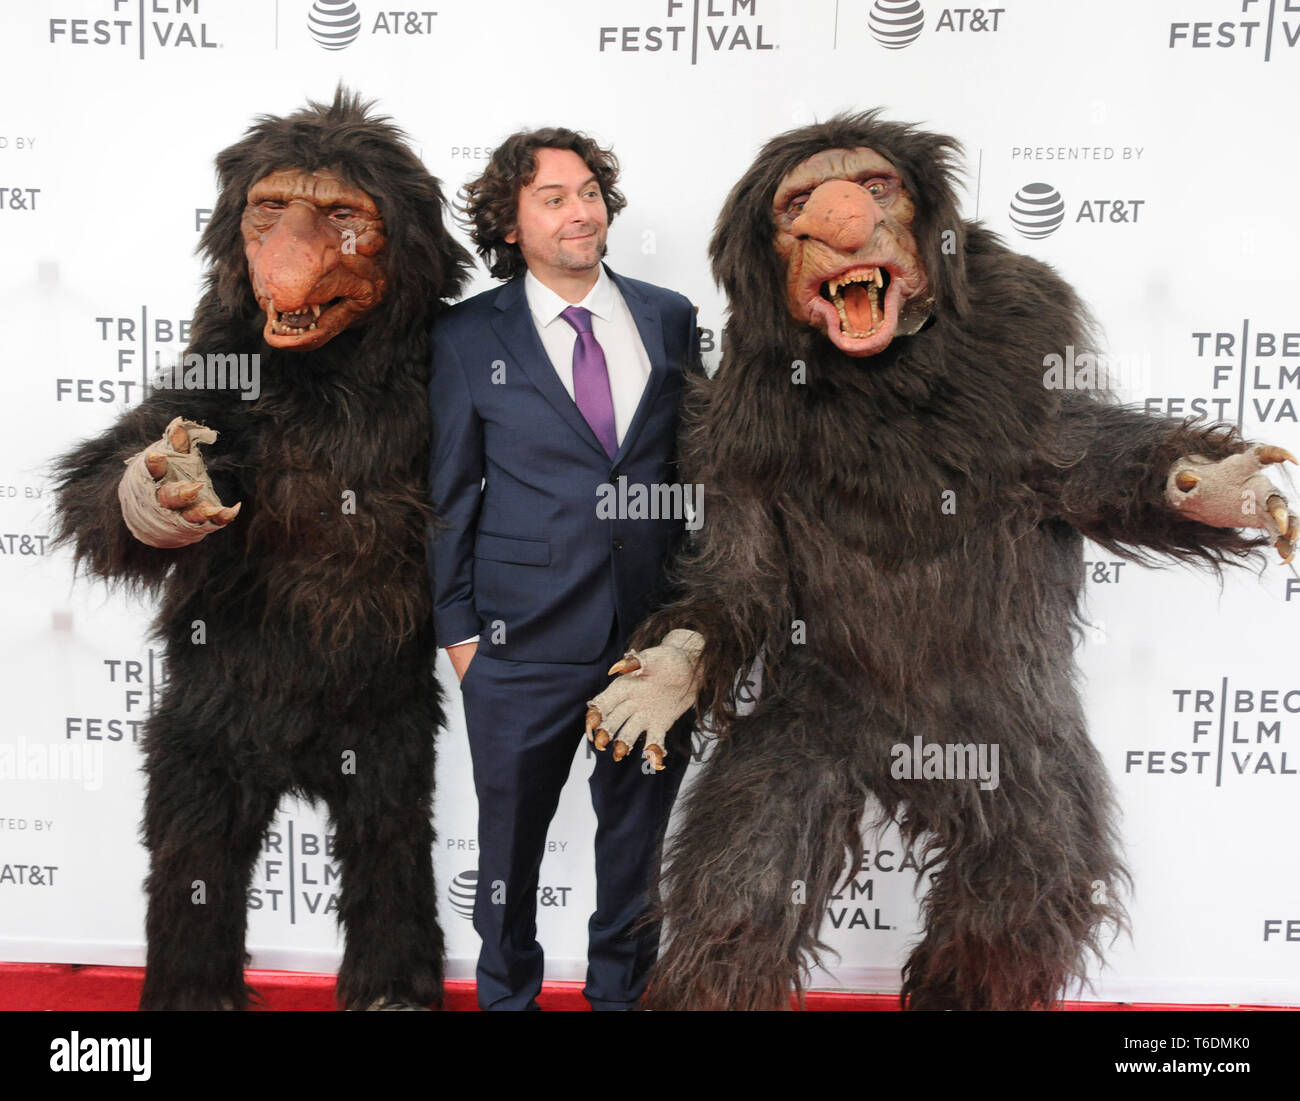 April 27, 2019 - New York, New York, U.S. - Mario Torres and Grumblers at the 2019 Tribeca Film Festival Premiere of ''The Place Of No Words'', held at the SVA Theater in Chelsea in New York, New York, USA, 27 April 2019 (Credit Image: © Ylmj/AdMedia via ZUMA Wire) Stock Photo